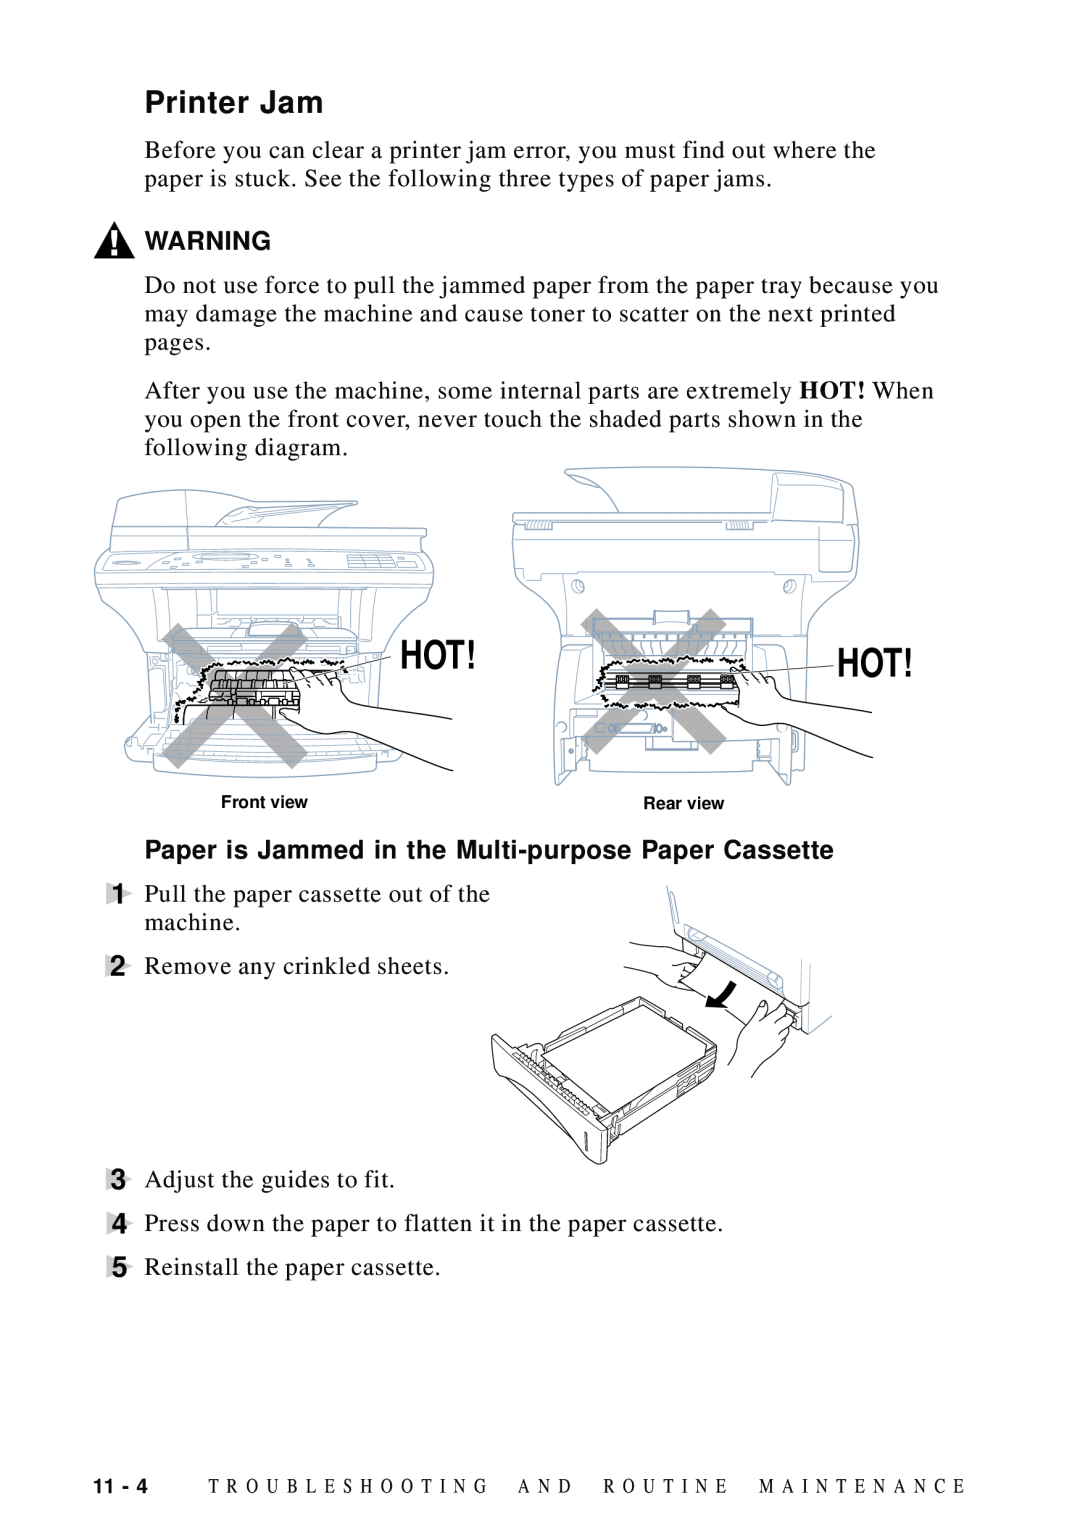 Brother DCP1200 manual Hot! Hot, Printer Jam, Paper is Jammed in the Multi-purpose Paper Cassette 